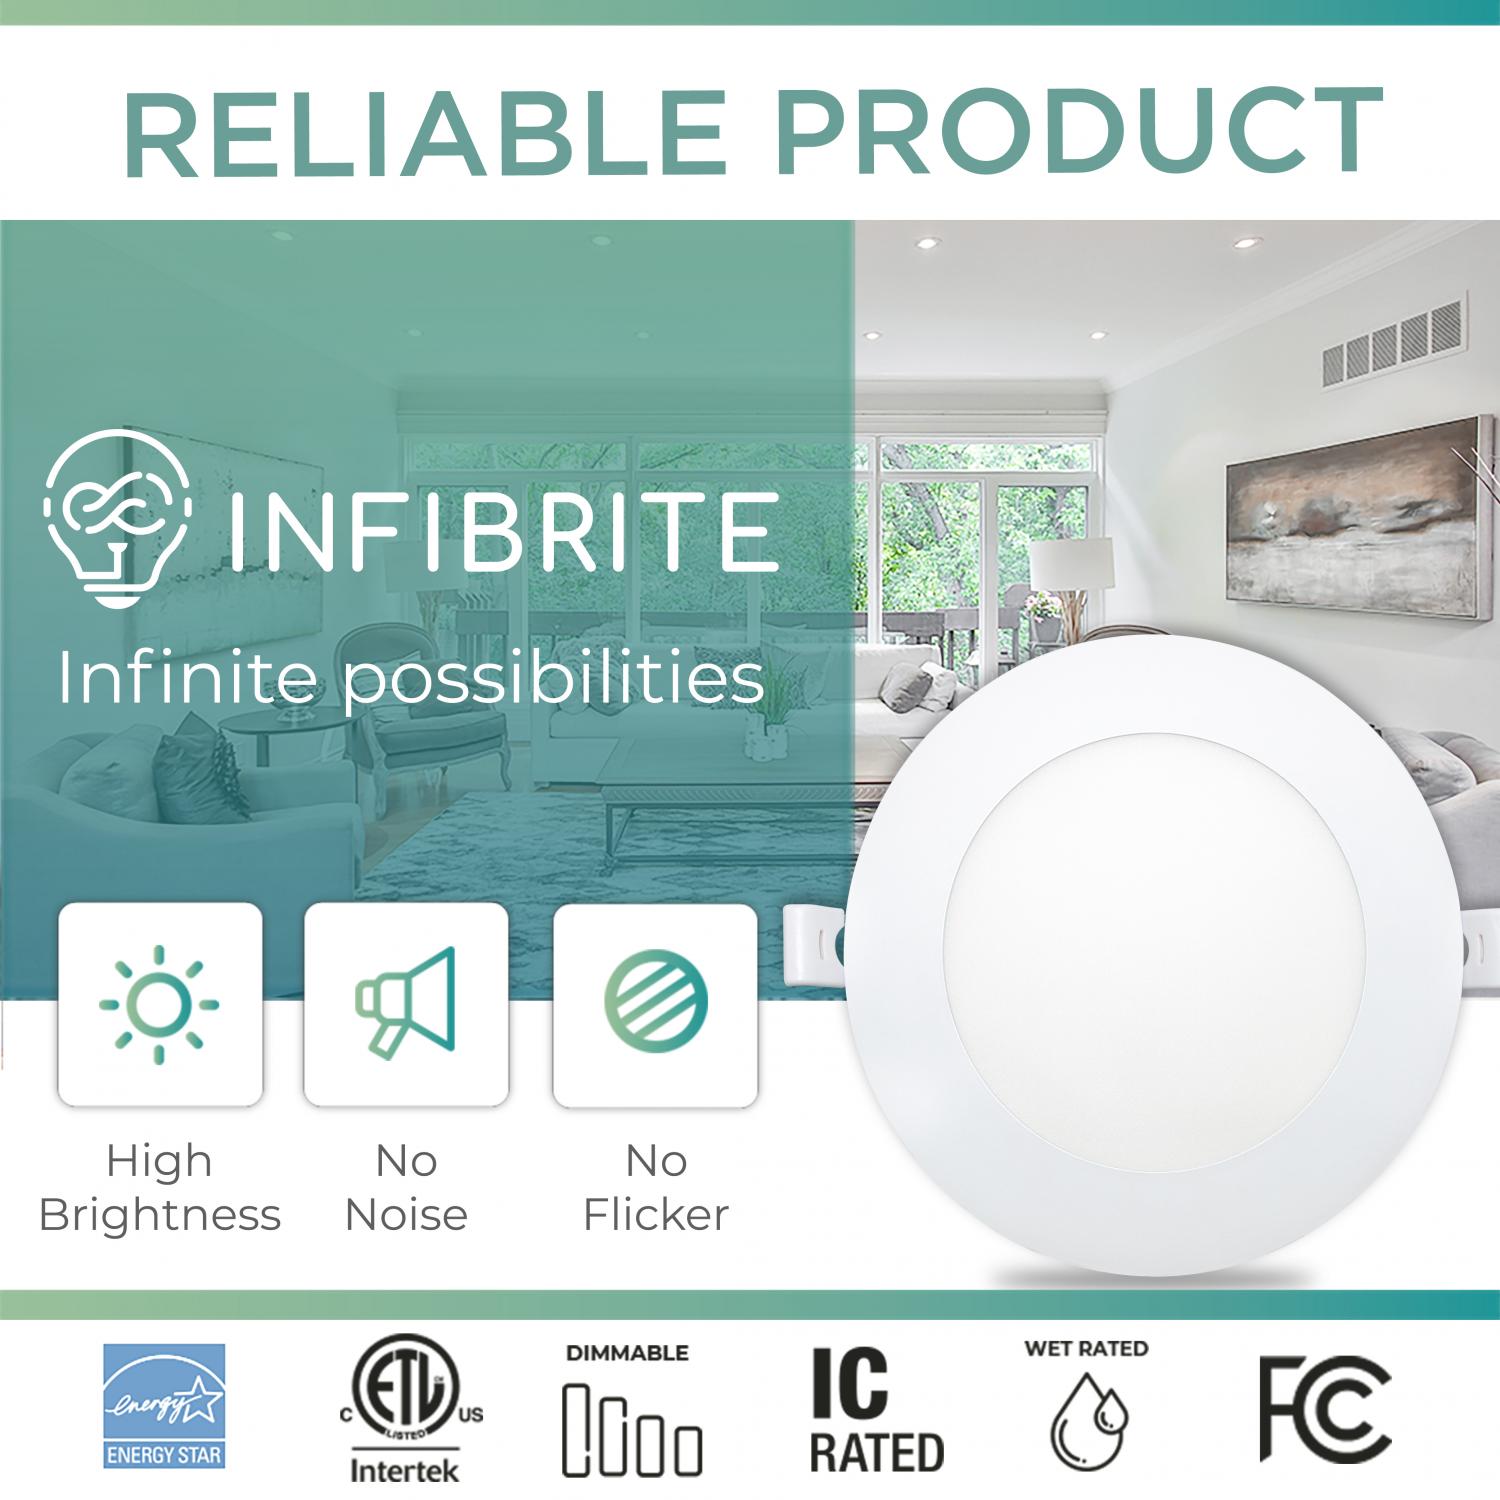 Infibrite 4 Inch 2700K Soft White 9W 750 LM Ultra-Slim LED Ceiling Light with Junction Box, Flush Mount, Dimmable, Fixture for Bedroom, Wet Rated for Bathroom Easy Install, 9W 75W, ETL & Energy Star, US Company